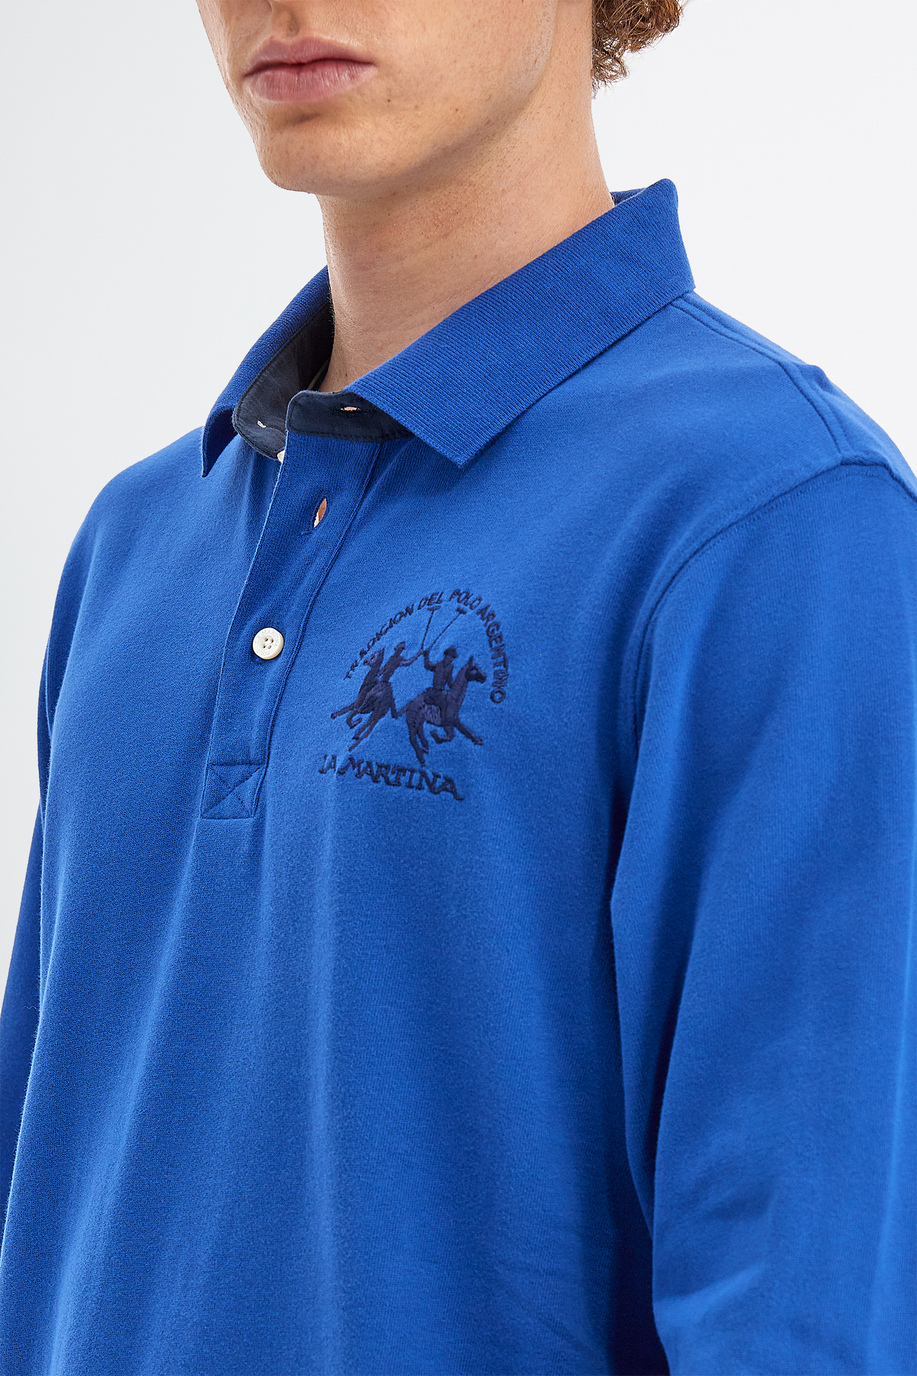 Men’s polo shirt in cotton jersey long sleeves slim fit - Polo Shirts | La Martina - Official Online Shop